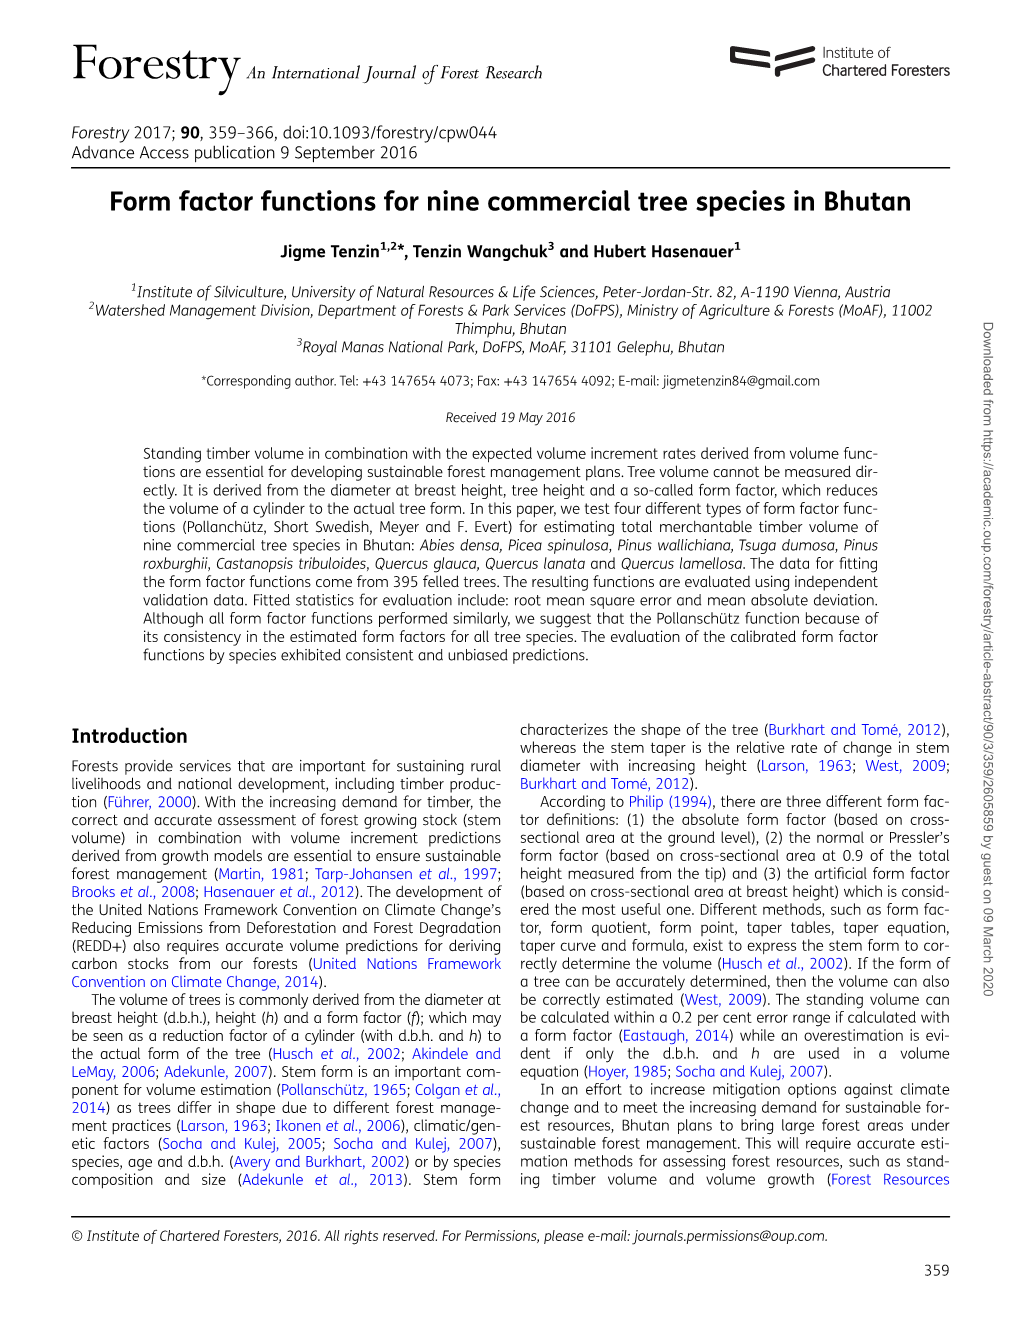 Forestryan International Journal of Forest Research